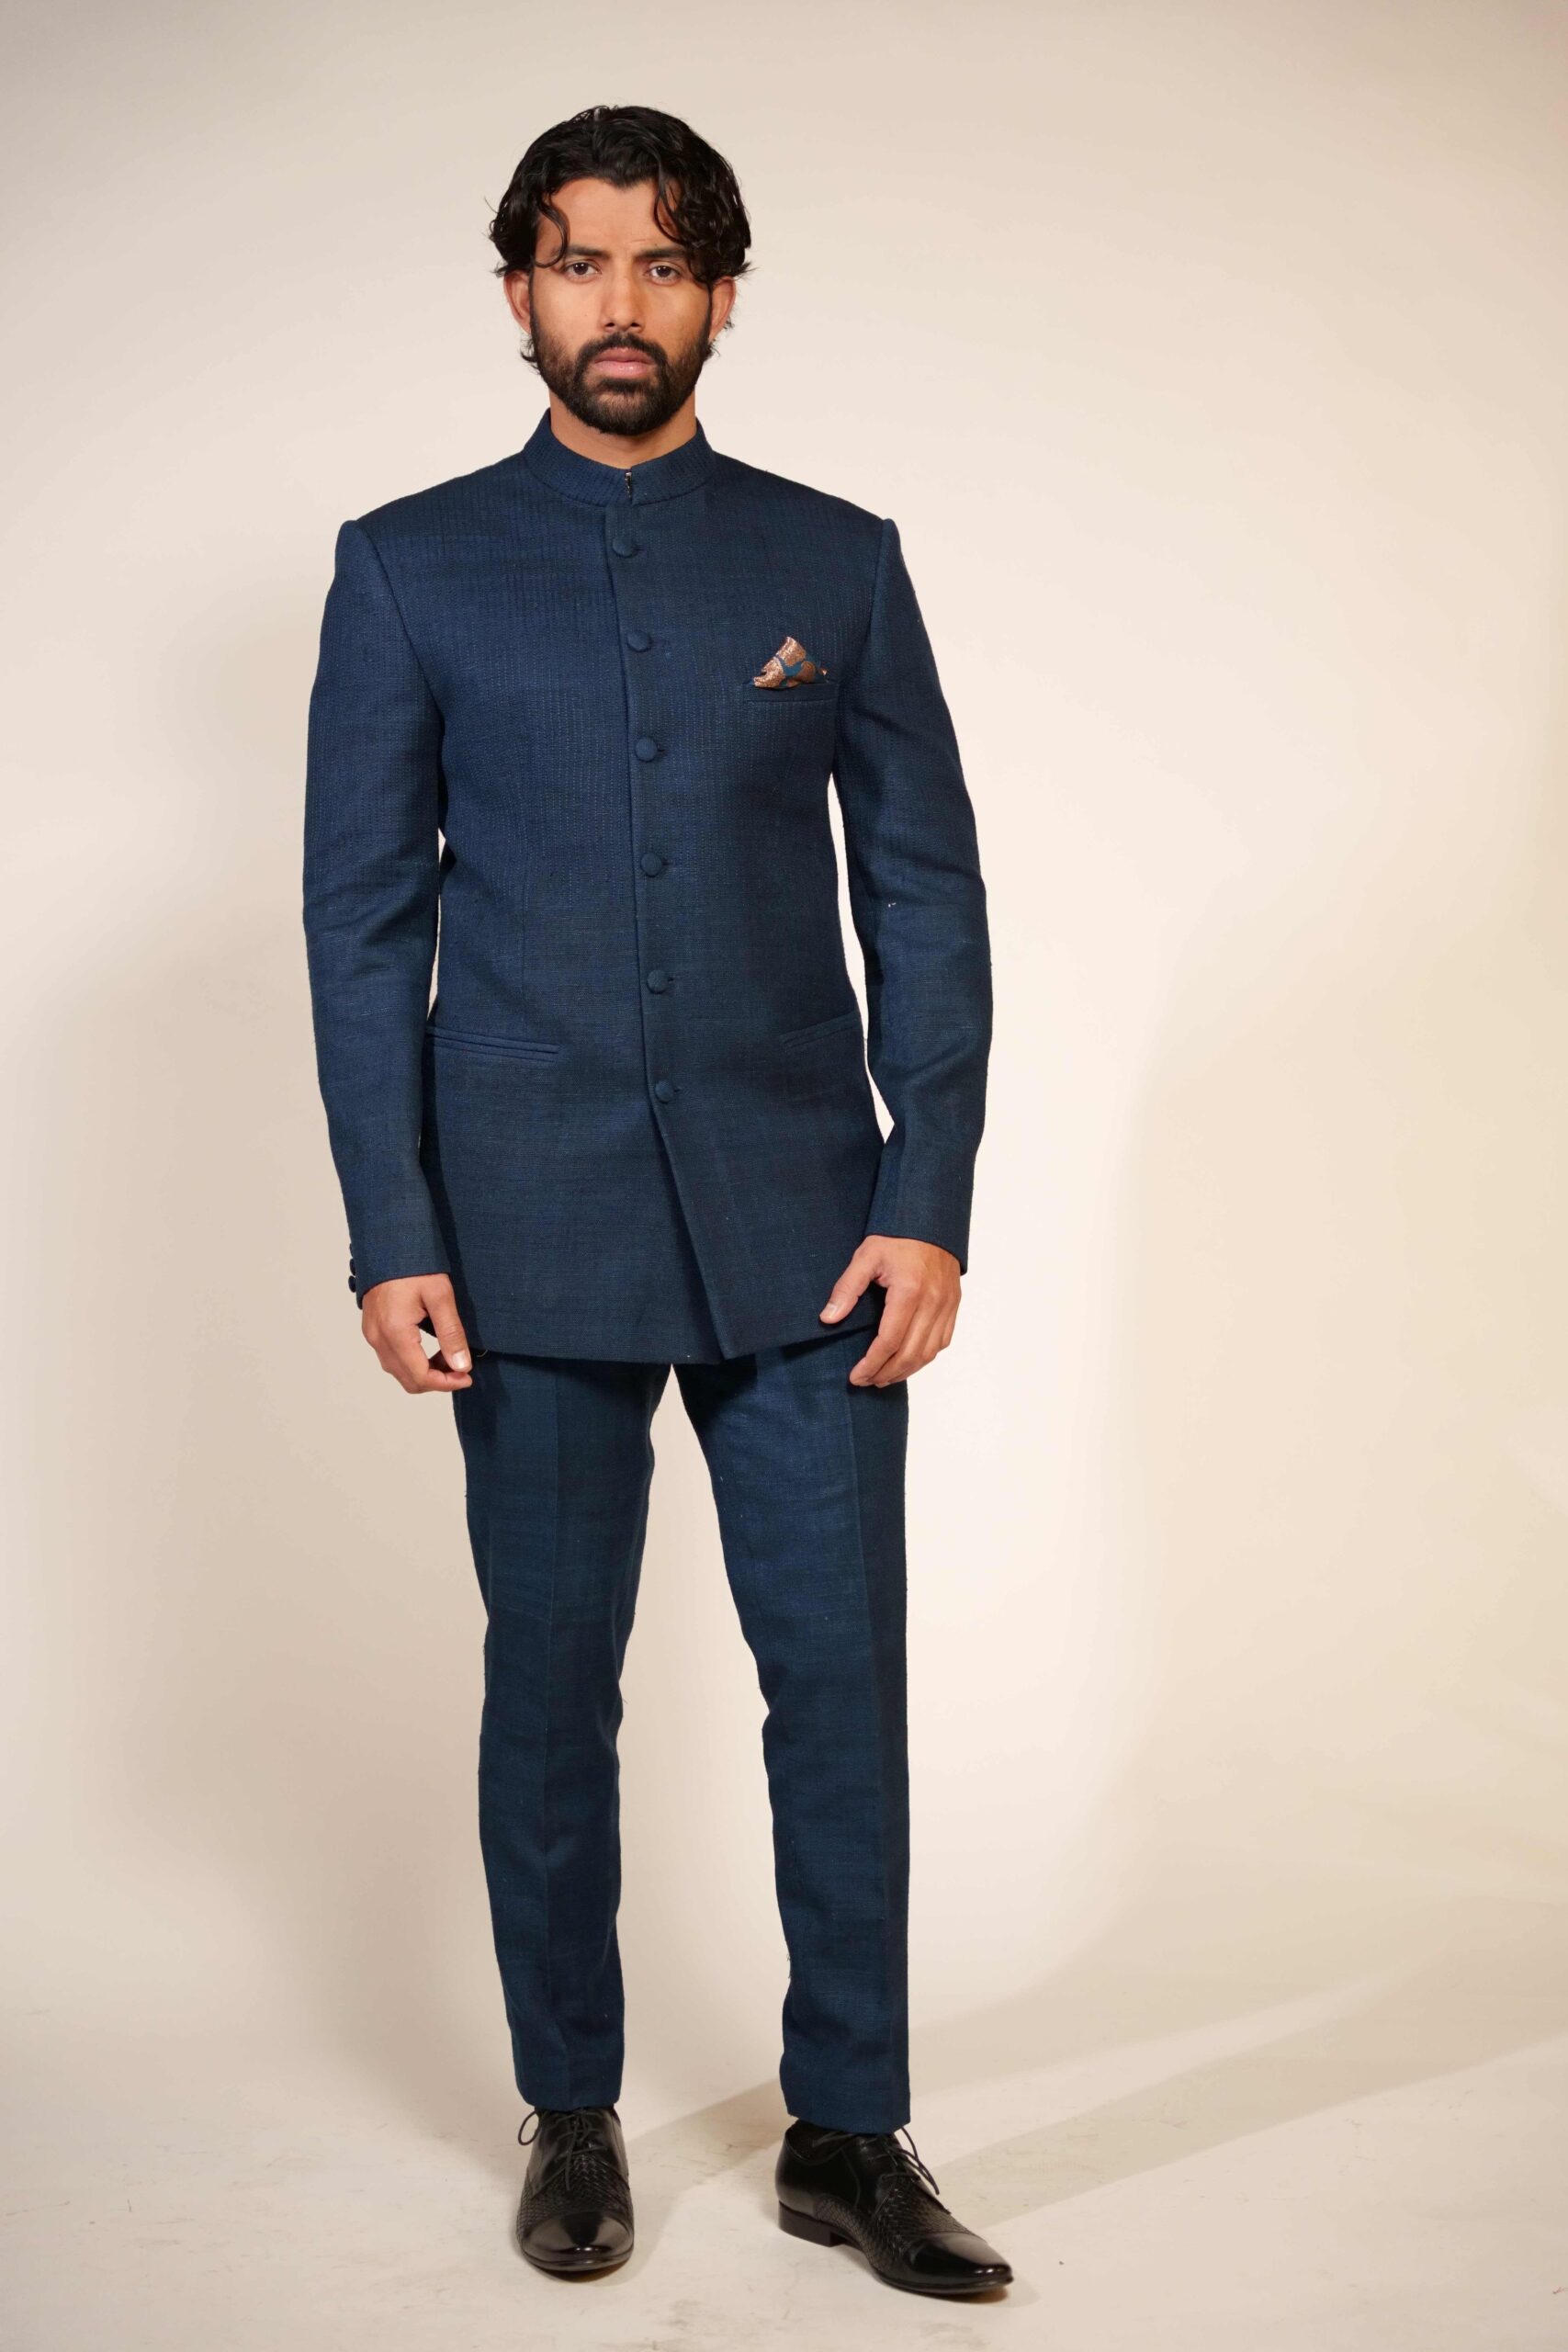 Bespoke Indian Maharaja Style Royal Teal Blue Jodhpuri Bandhgala Suit With  White Trouser Wedding Functions Perfect for Formal Party Wear - Etsy |  Fashion suits for men, Designer suits for men, Dress